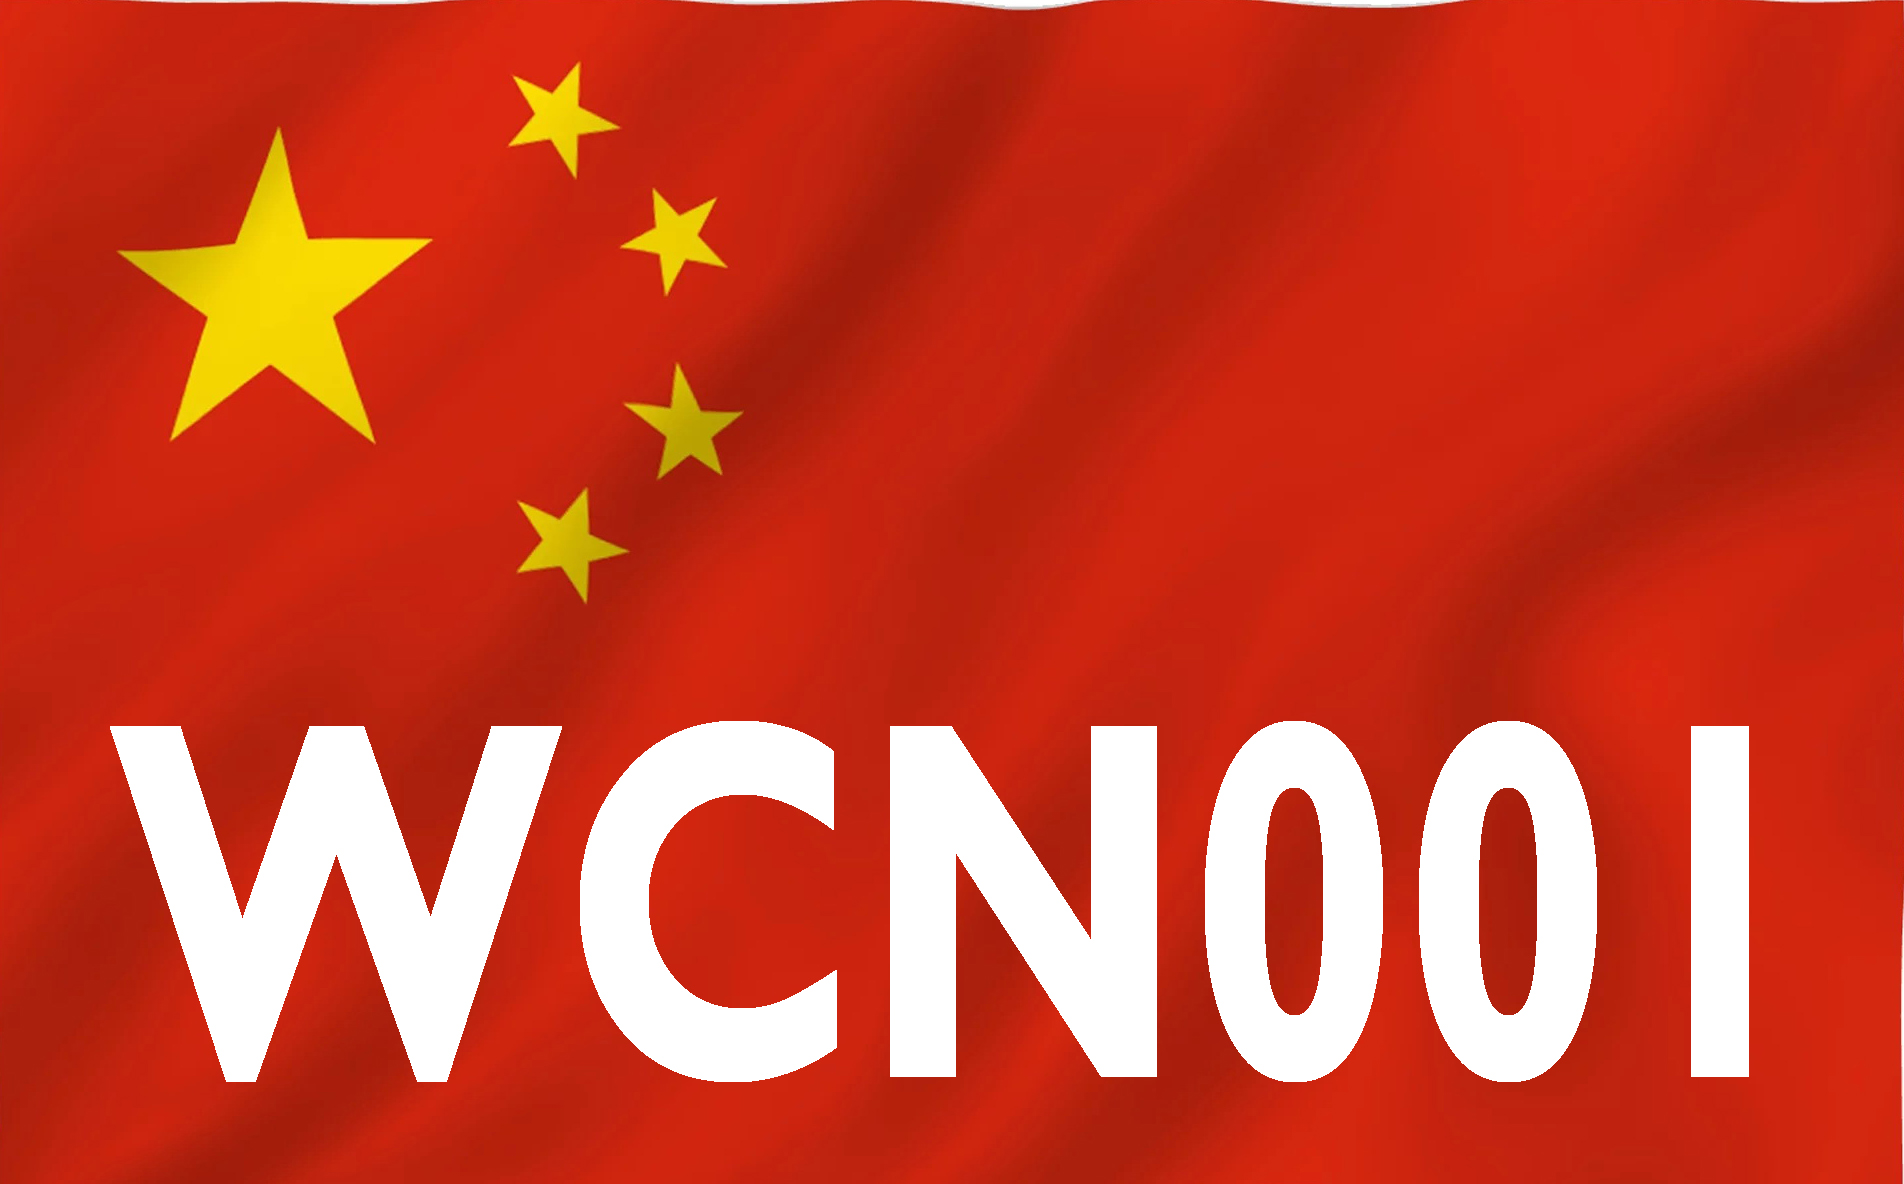 WCN001